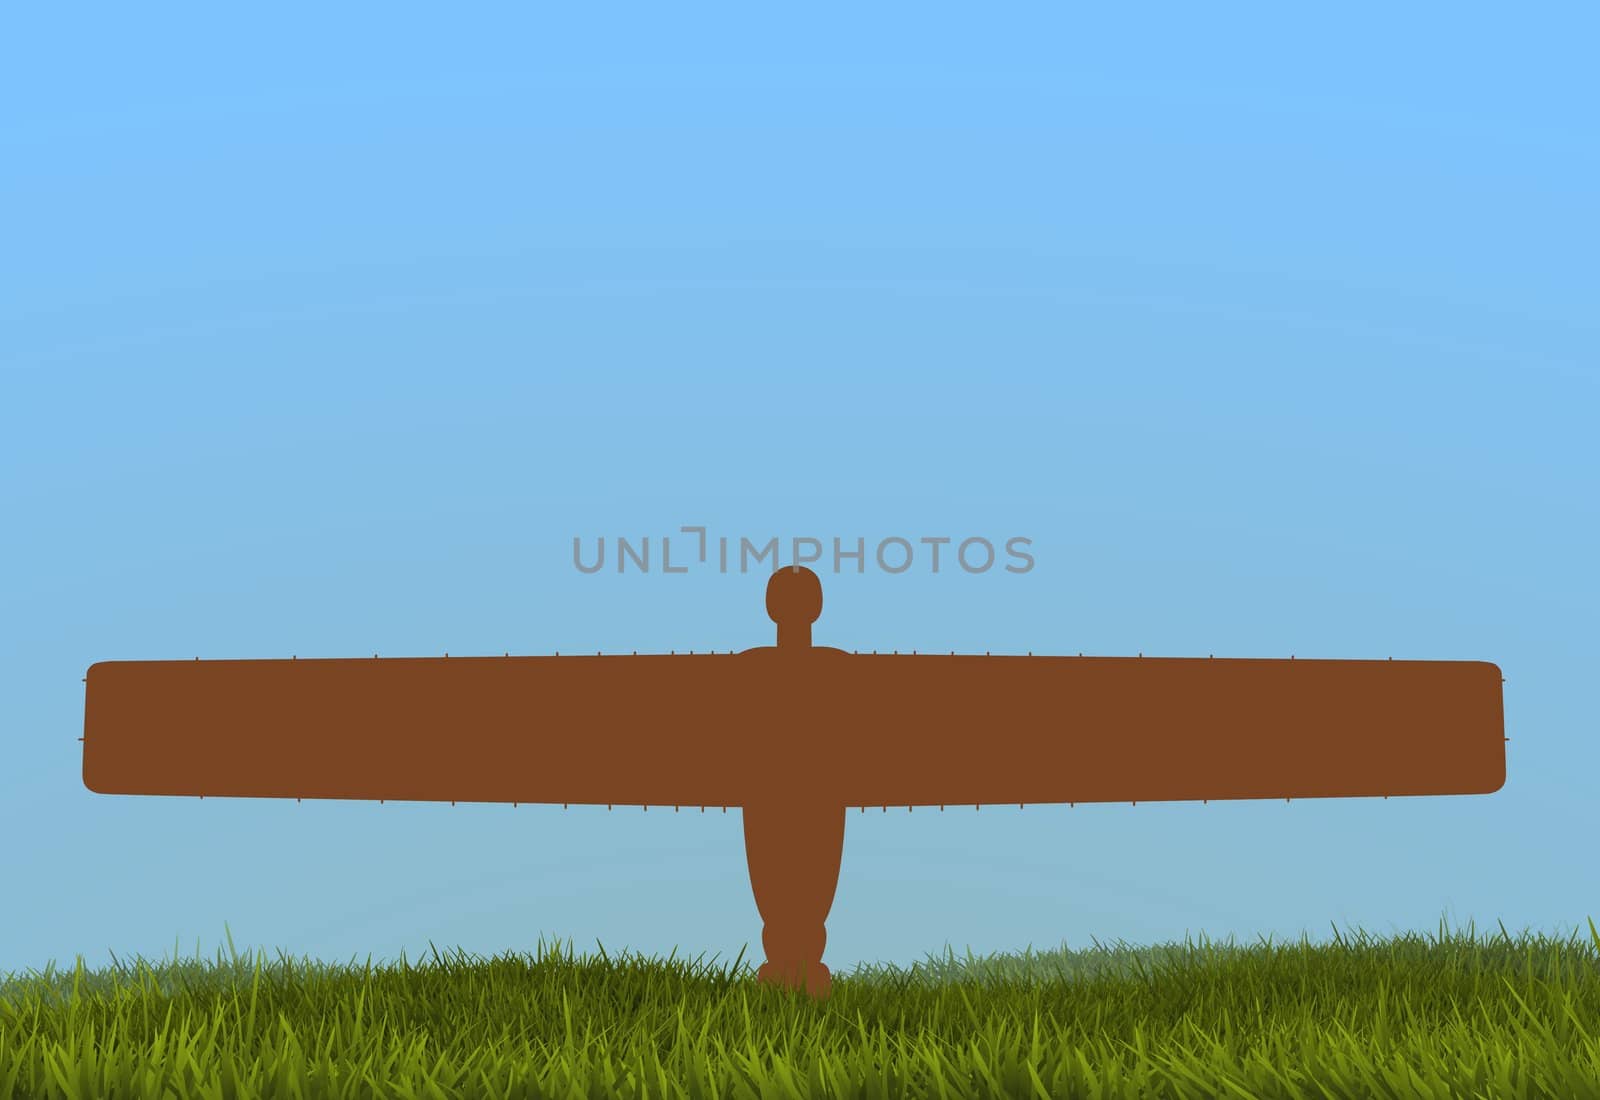 Illustration of the Angel of the north in the United Kingdom